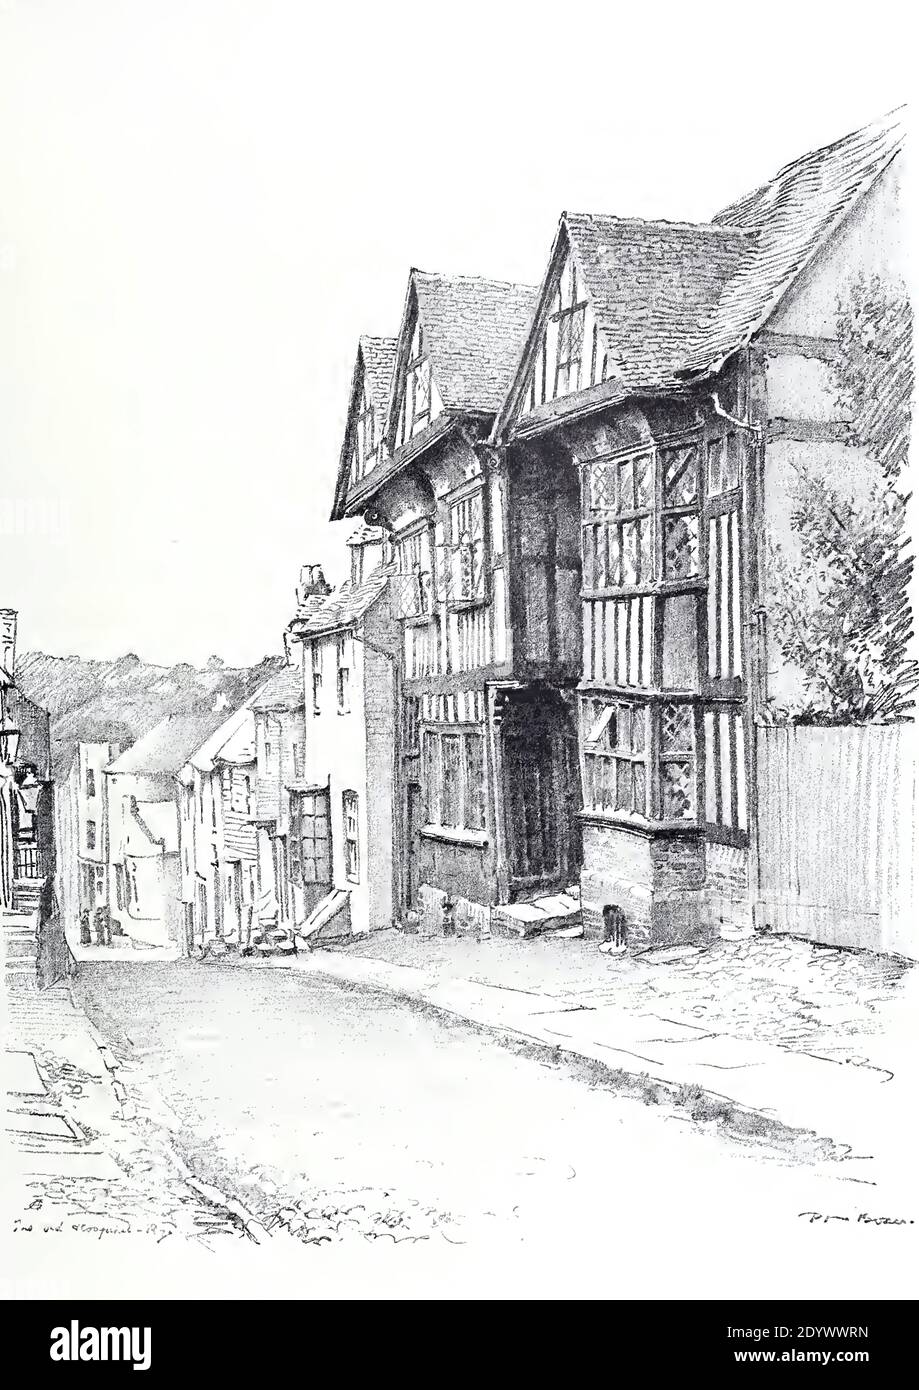 Antique vintage print of The Old Hospital, Rye, Sussex, England by Noel Boxer from Sketches of Old Rye. Stock Photo